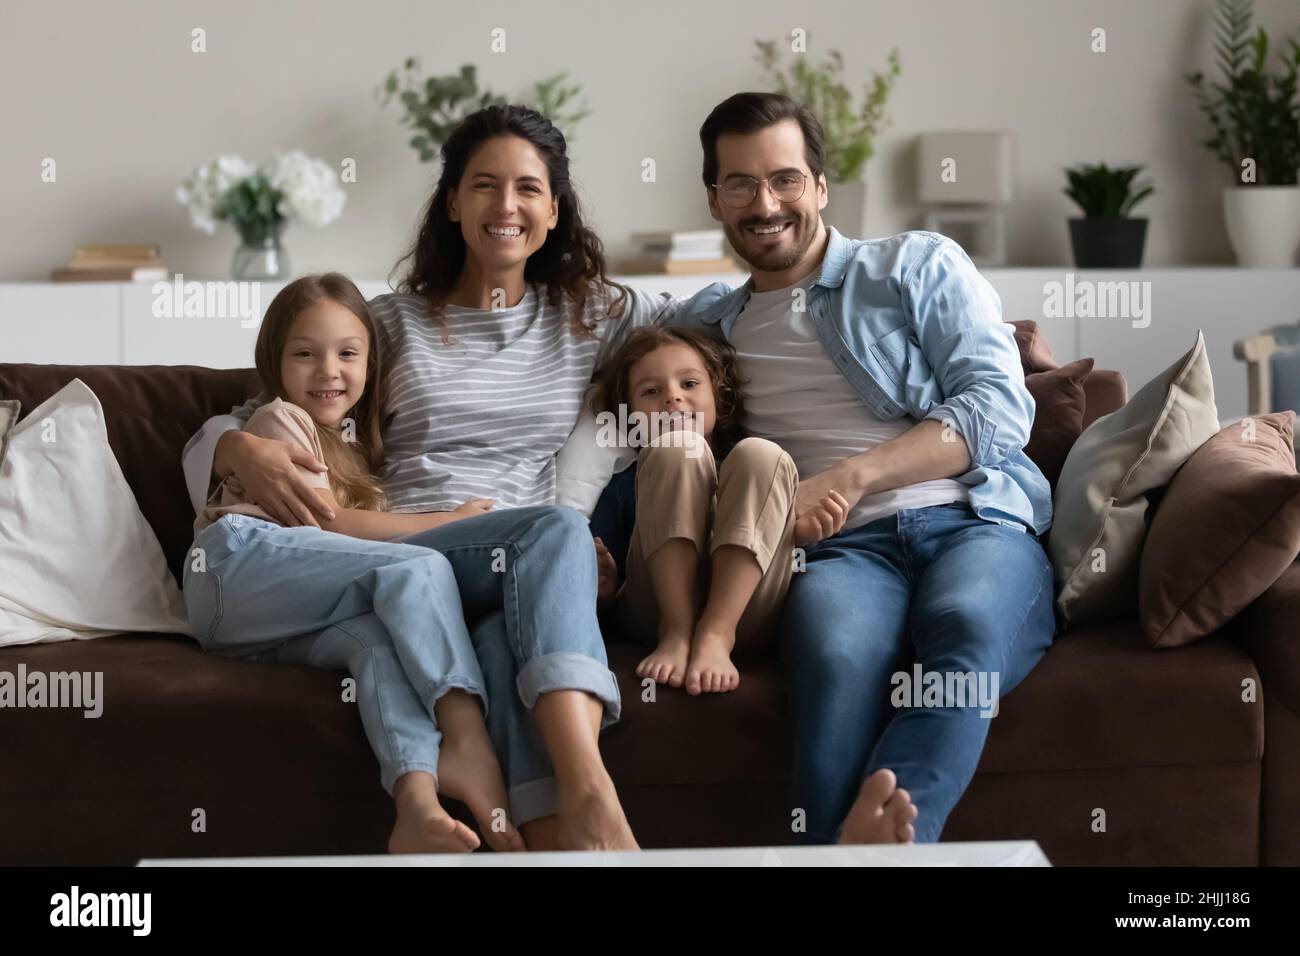 Couple and children sitting on sofa smiling looking at camera Stock Photo